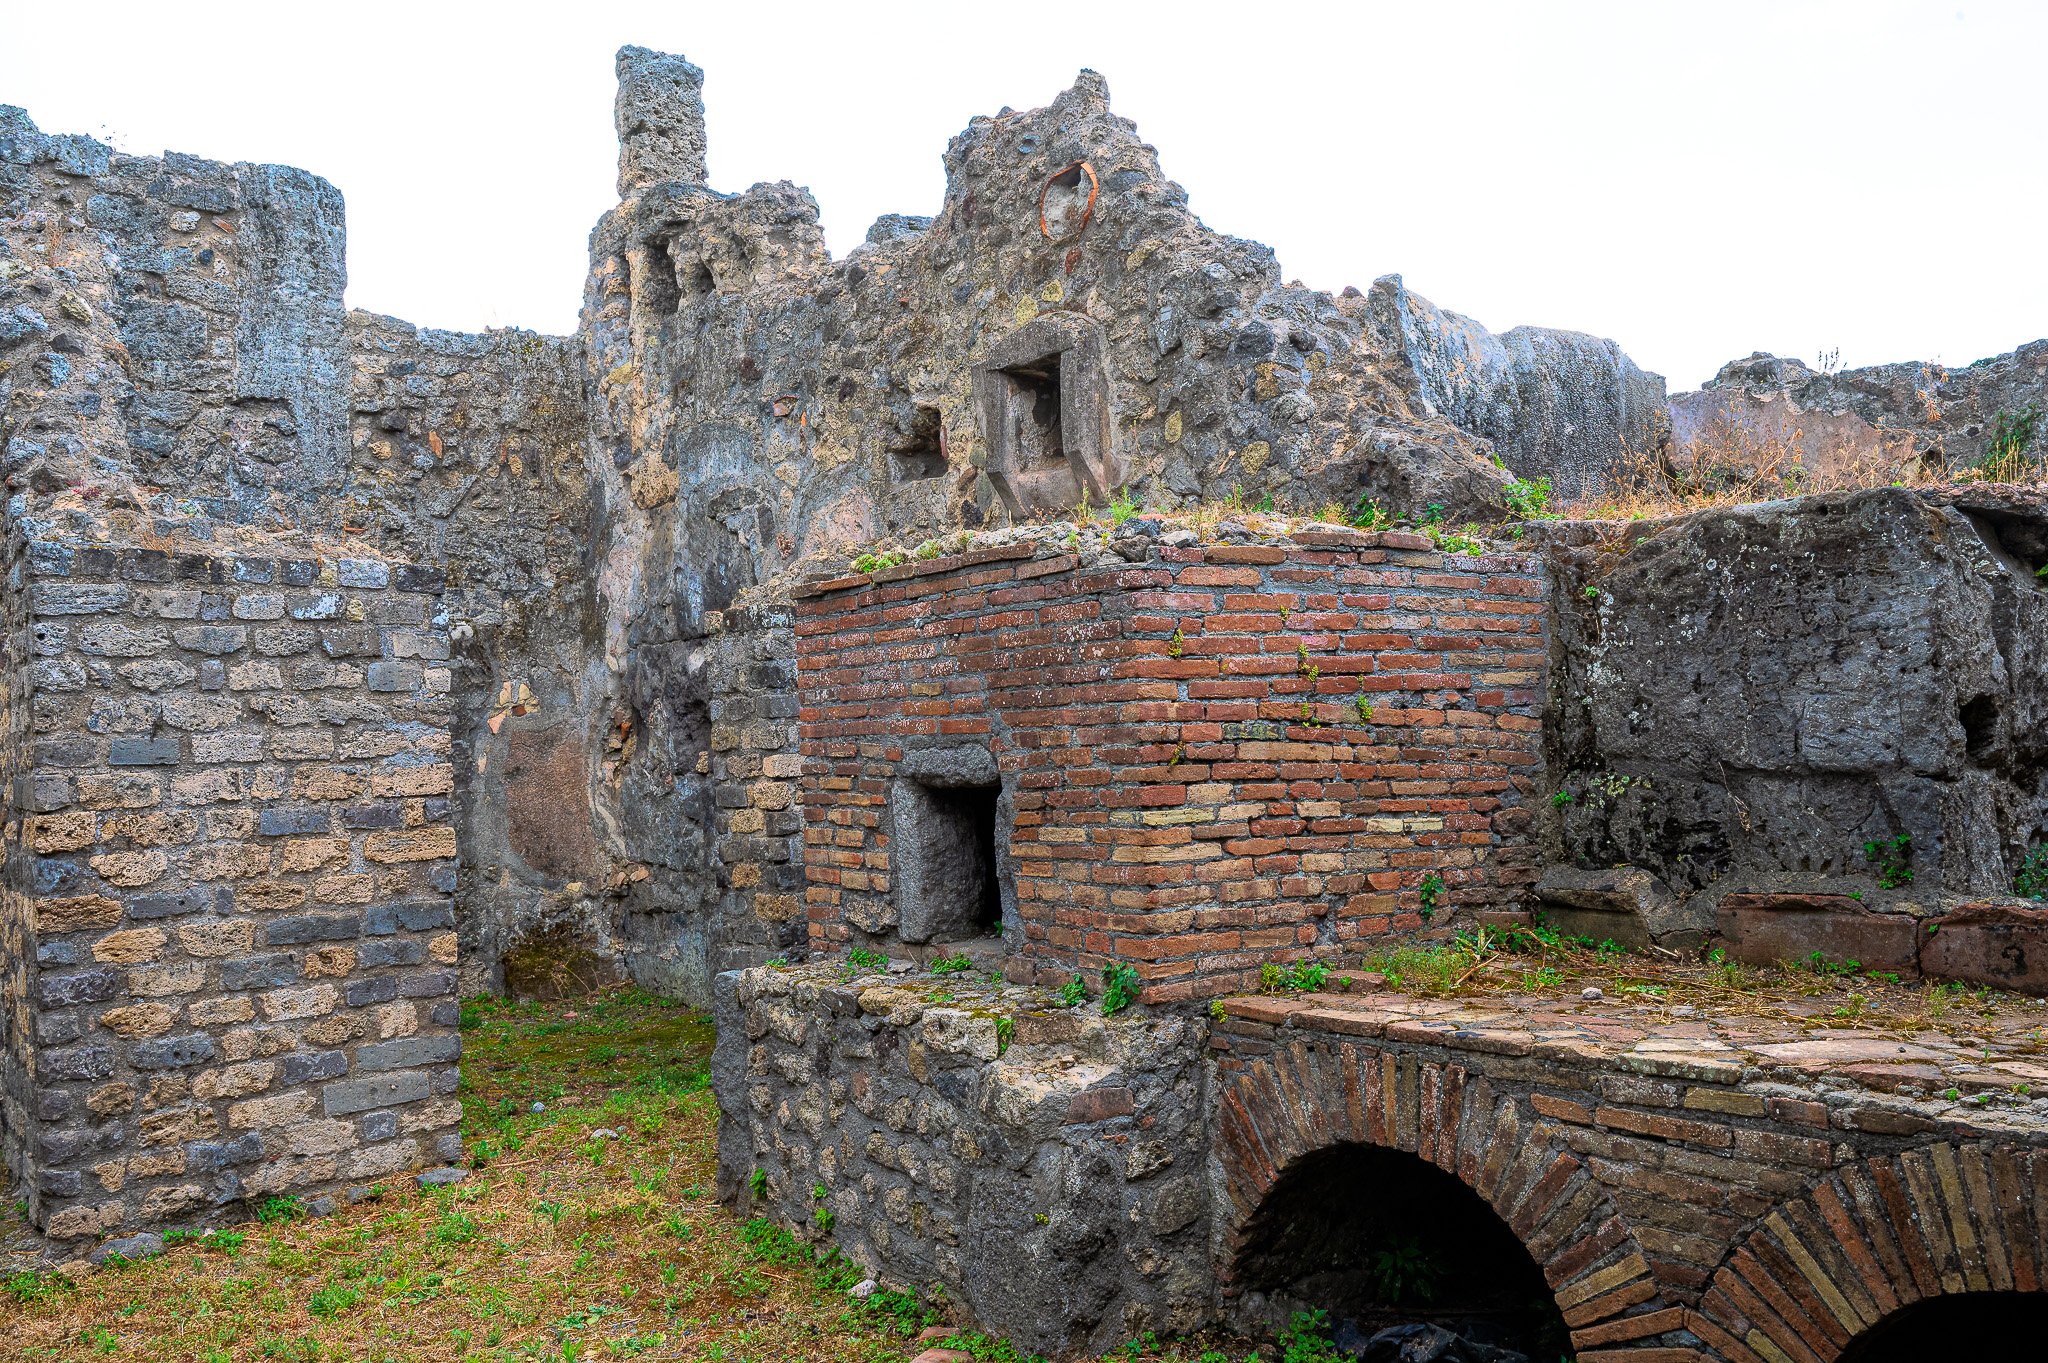 Houses, shops and bars of Pompeii